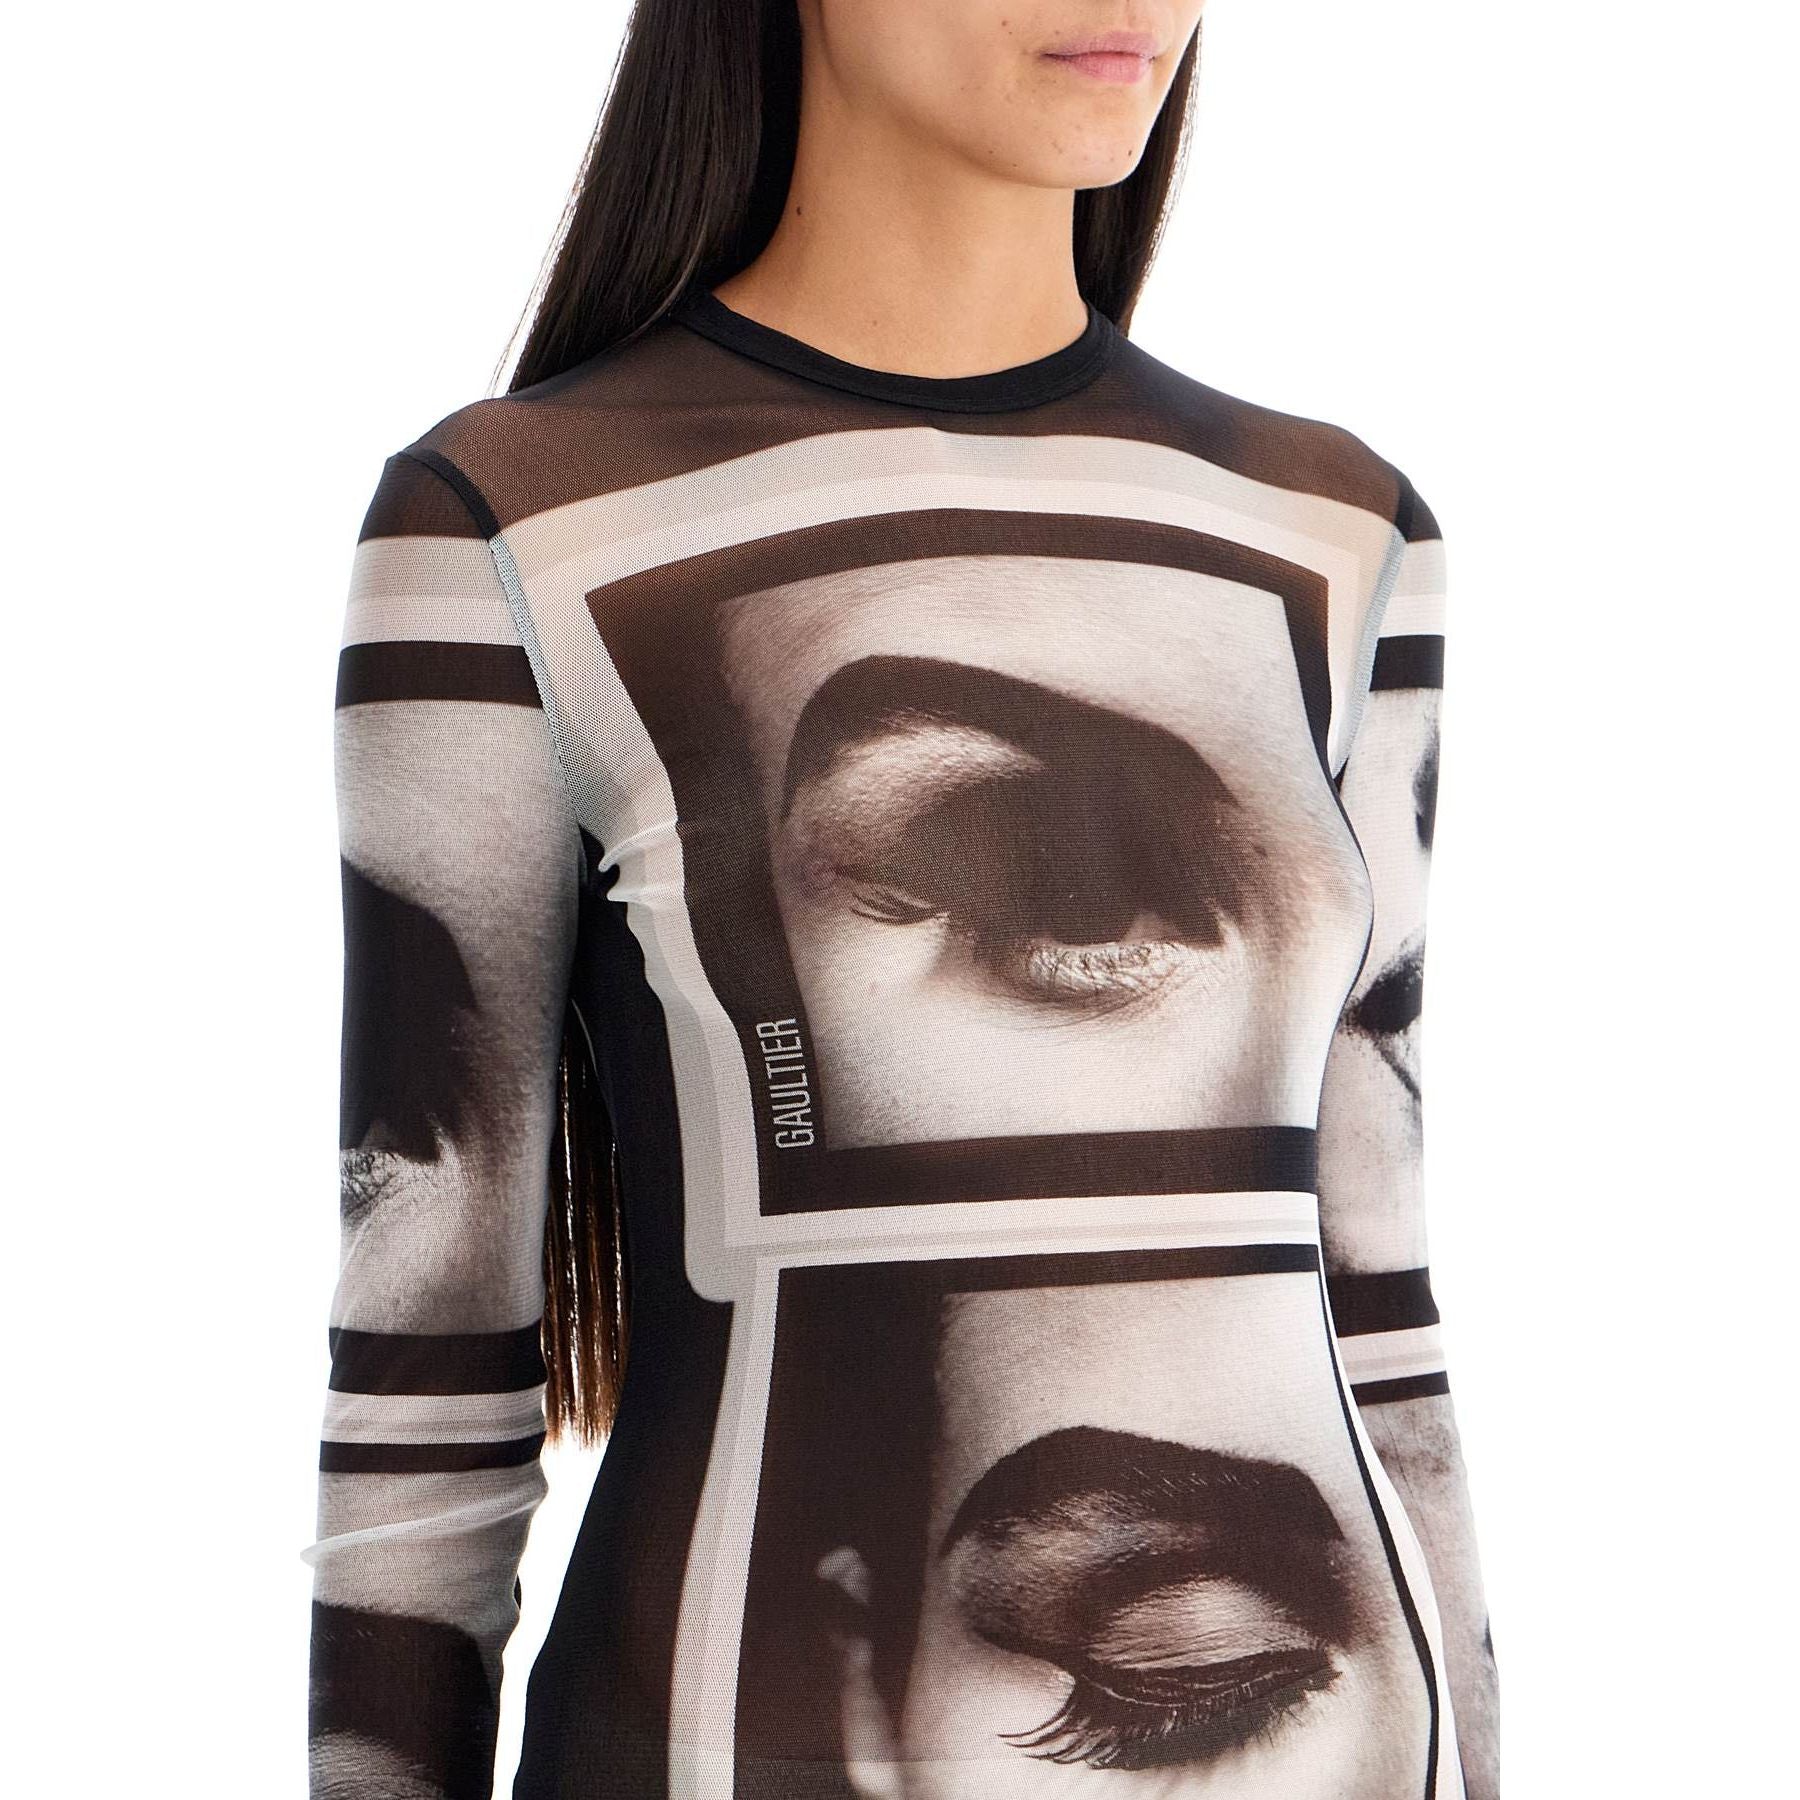 The Eyes and Lips Dress